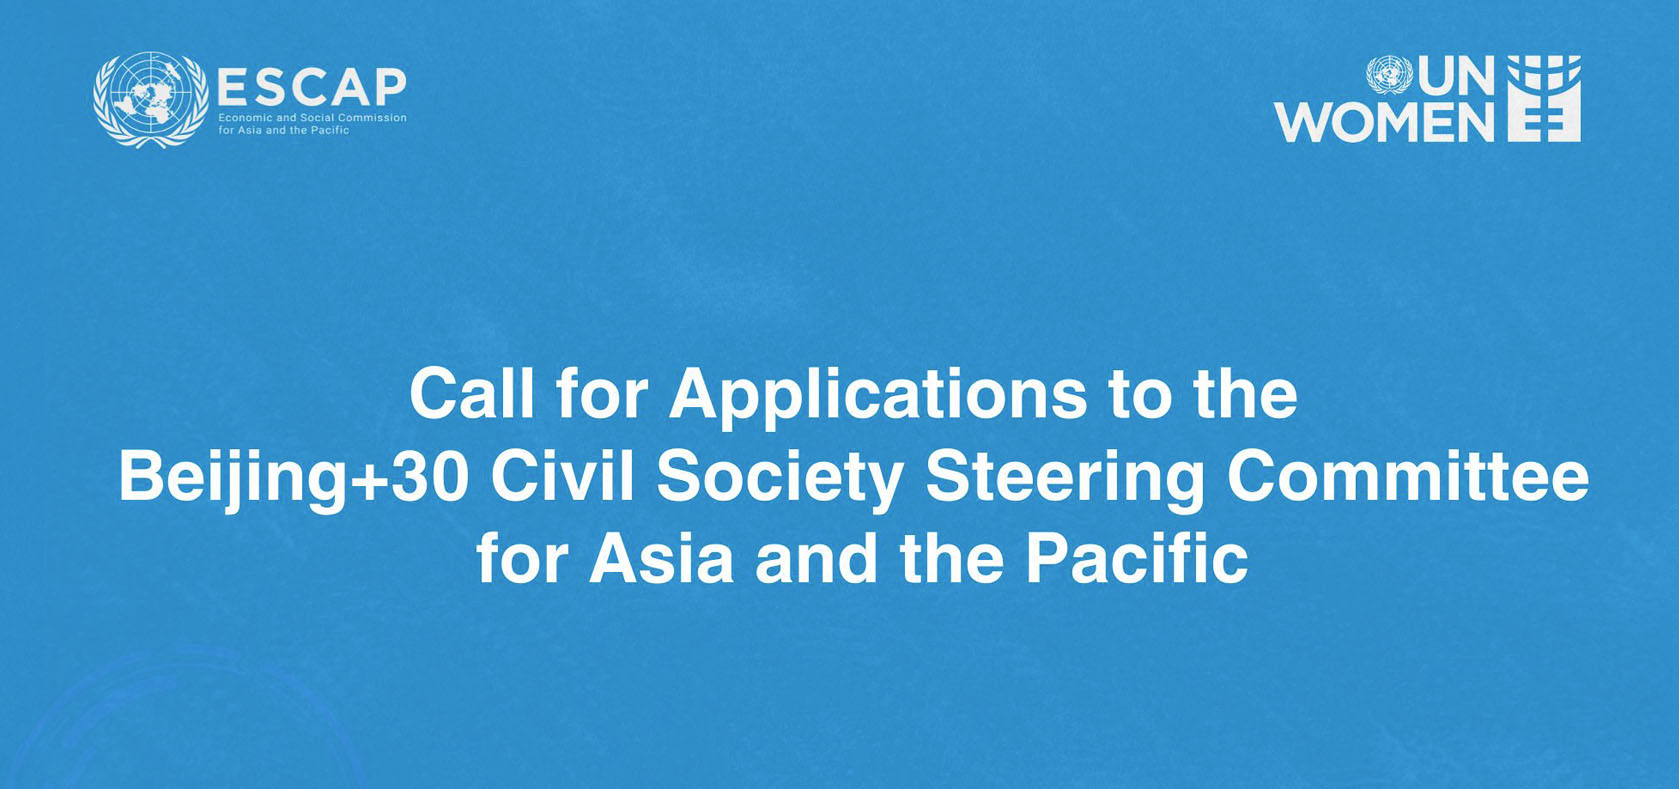 Call for Applications to the
Beijing+30 Civil Society Steering Committee for Asia and the Pacific